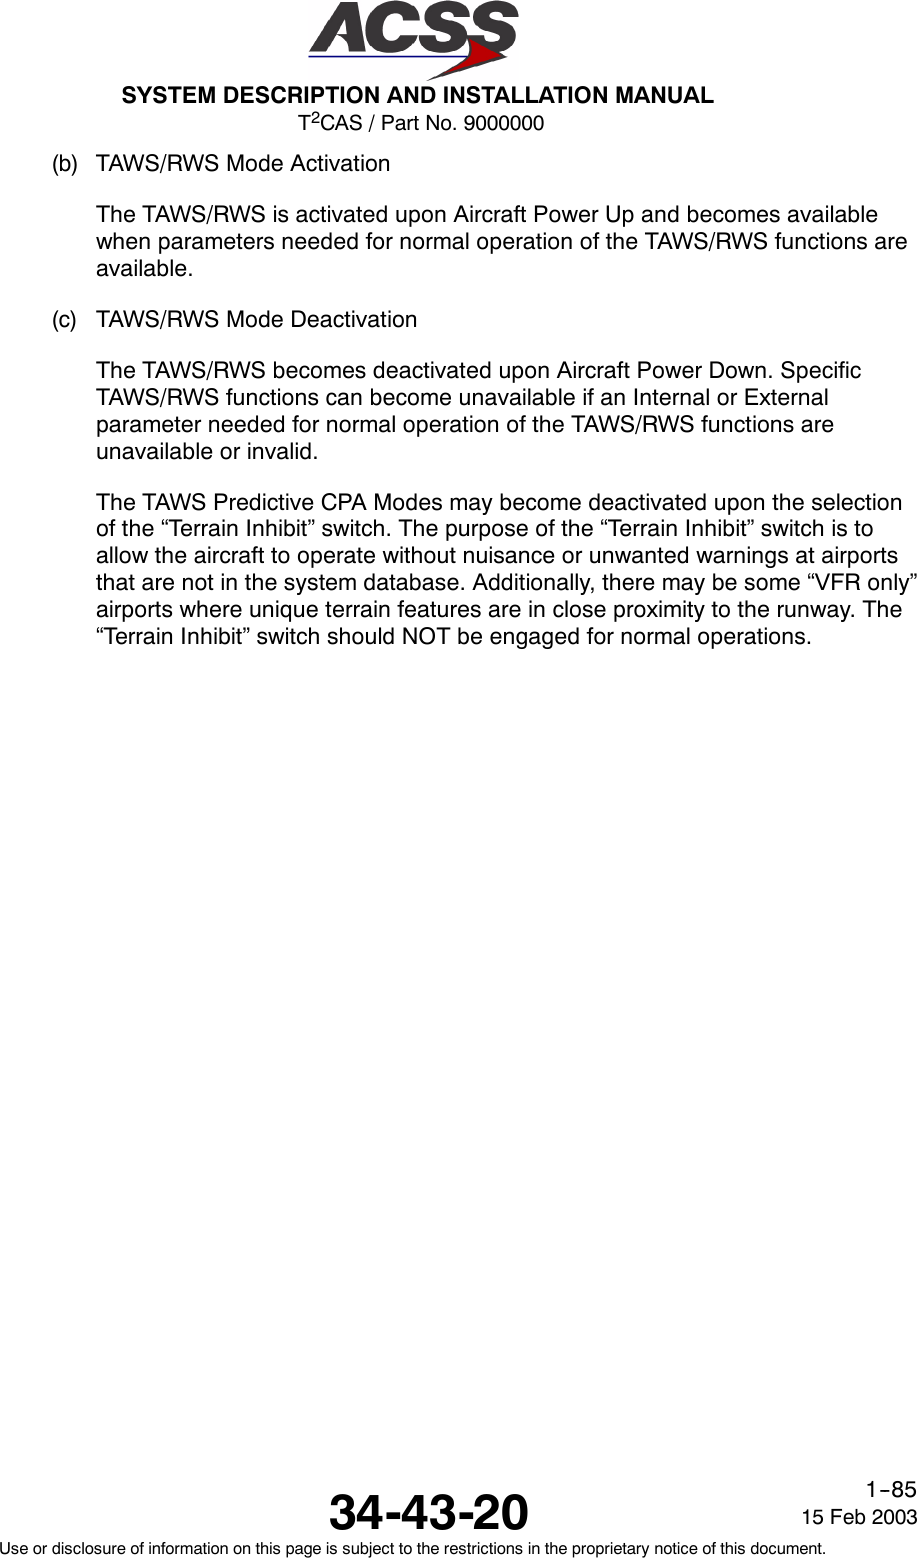 T2CAS / Part No. 9000000SYSTEM DESCRIPTION AND INSTALLATION MANUAL34-43-20 15 Feb 2003Use or disclosure of information on this page is subject to the restrictions in the proprietary notice of this document.1--85(b) TAWS/RWS Mode ActivationThe TAWS/RWS is activated upon Aircraft Power Up and becomes availablewhen parameters needed for normal operation of the TAWS/RWS functions areavailable.(c) TAWS/RWS Mode DeactivationThe TAWS/RWS becomes deactivated upon Aircraft Power Down. SpecificTAWS/RWS functions can become unavailable if an Internal or Externalparameter needed for normal operation of the TAWS/RWS functions areunavailable or invalid.The TAWS Predictive CPA Modes may become deactivated upon the selectionof the “Terrain Inhibit” switch. The purpose of the “Terrain Inhibit” switch is toallow the aircraft to operate without nuisance or unwanted warnings at airportsthat are not in the system database. Additionally, there may be some “VFR only”airports where unique terrain features are in close proximity to the runway. The“Terrain Inhibit” switch should NOT be engaged for normal operations.